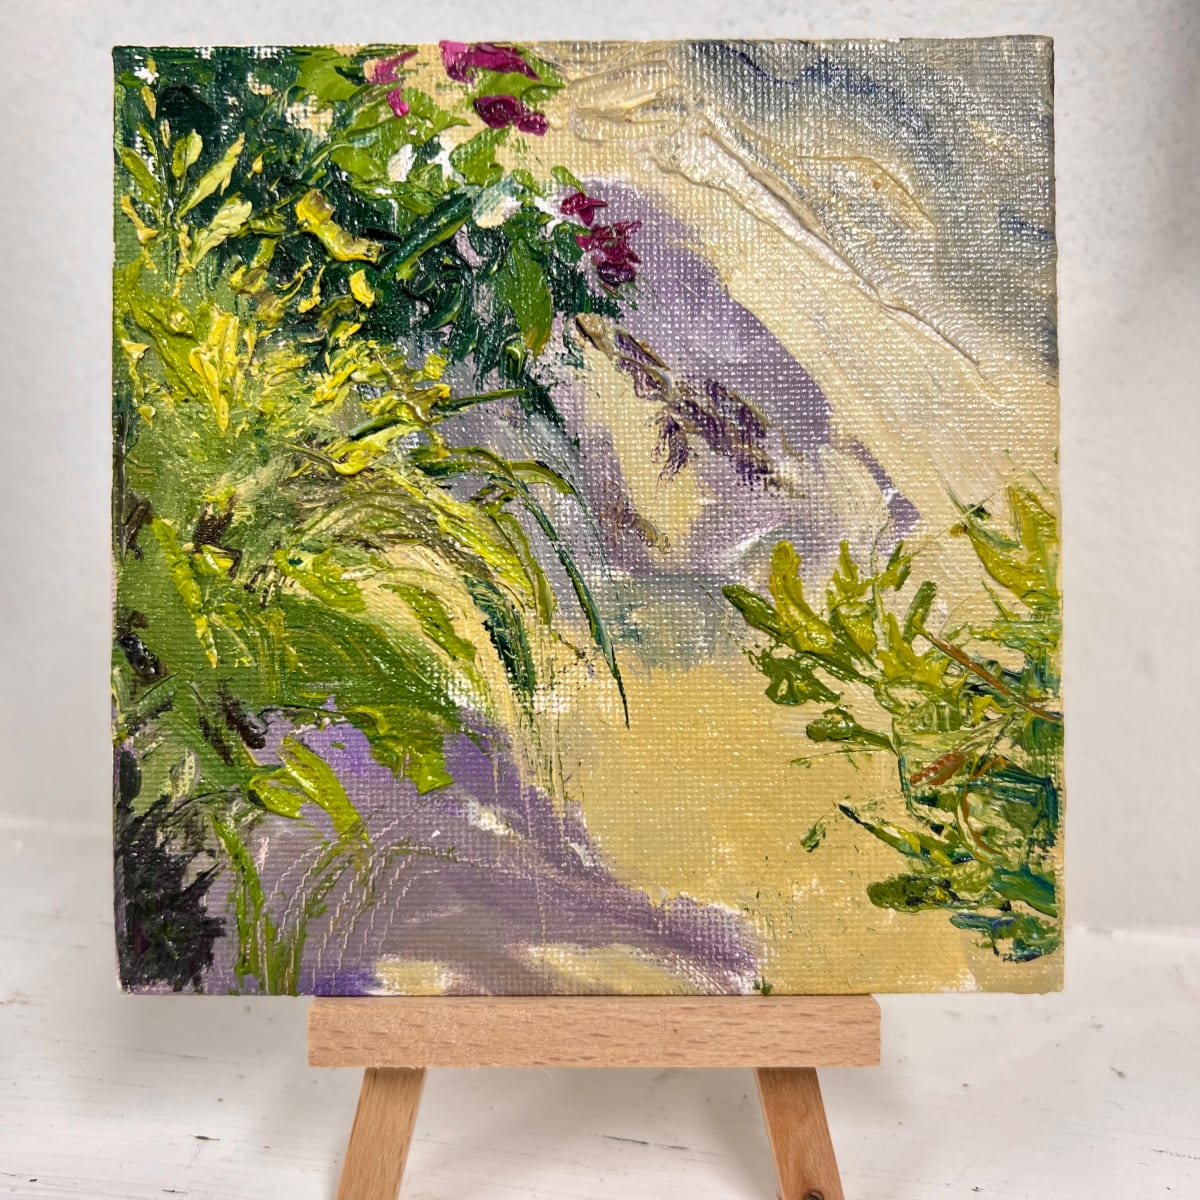 Dune Flora by Julia Chandler Lawing  Image: Block Island's sand dunes are a host to beach flora such as salt spray roses. Painted en plein air, oil on canvas board.